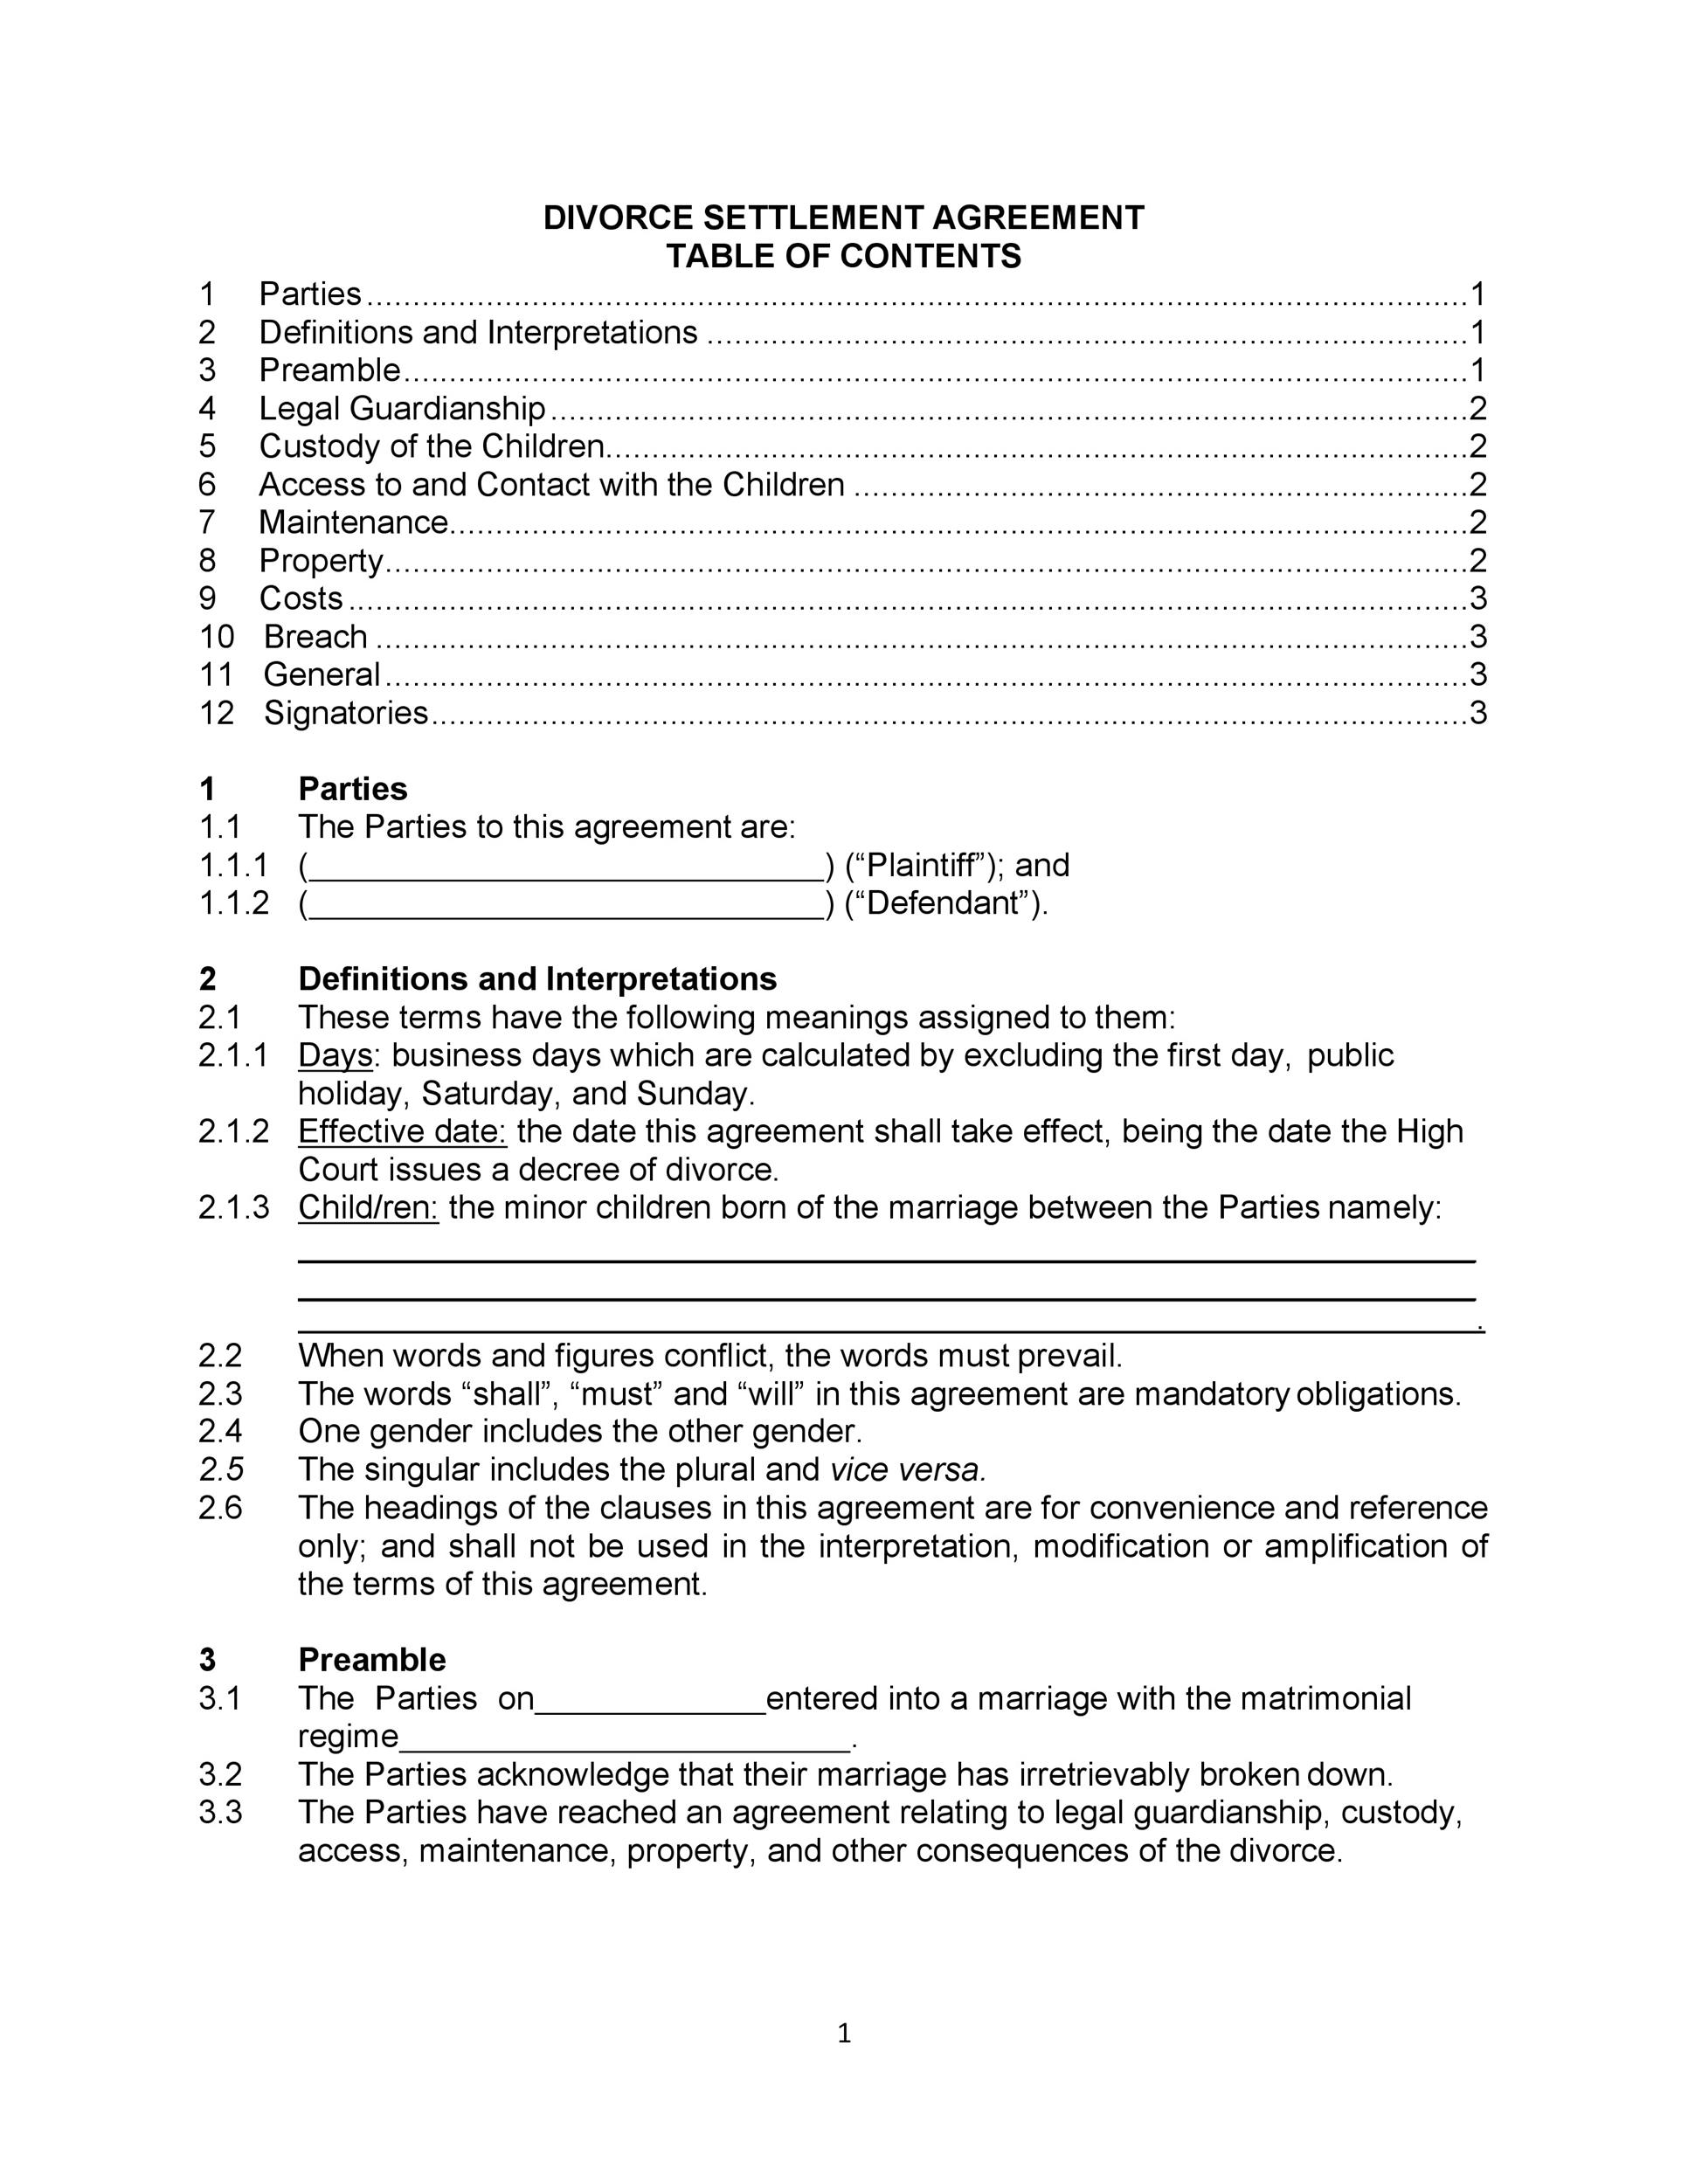 Voluntary Retrenchment Agreement Template South Africa  Best of With sole mandate agreement template